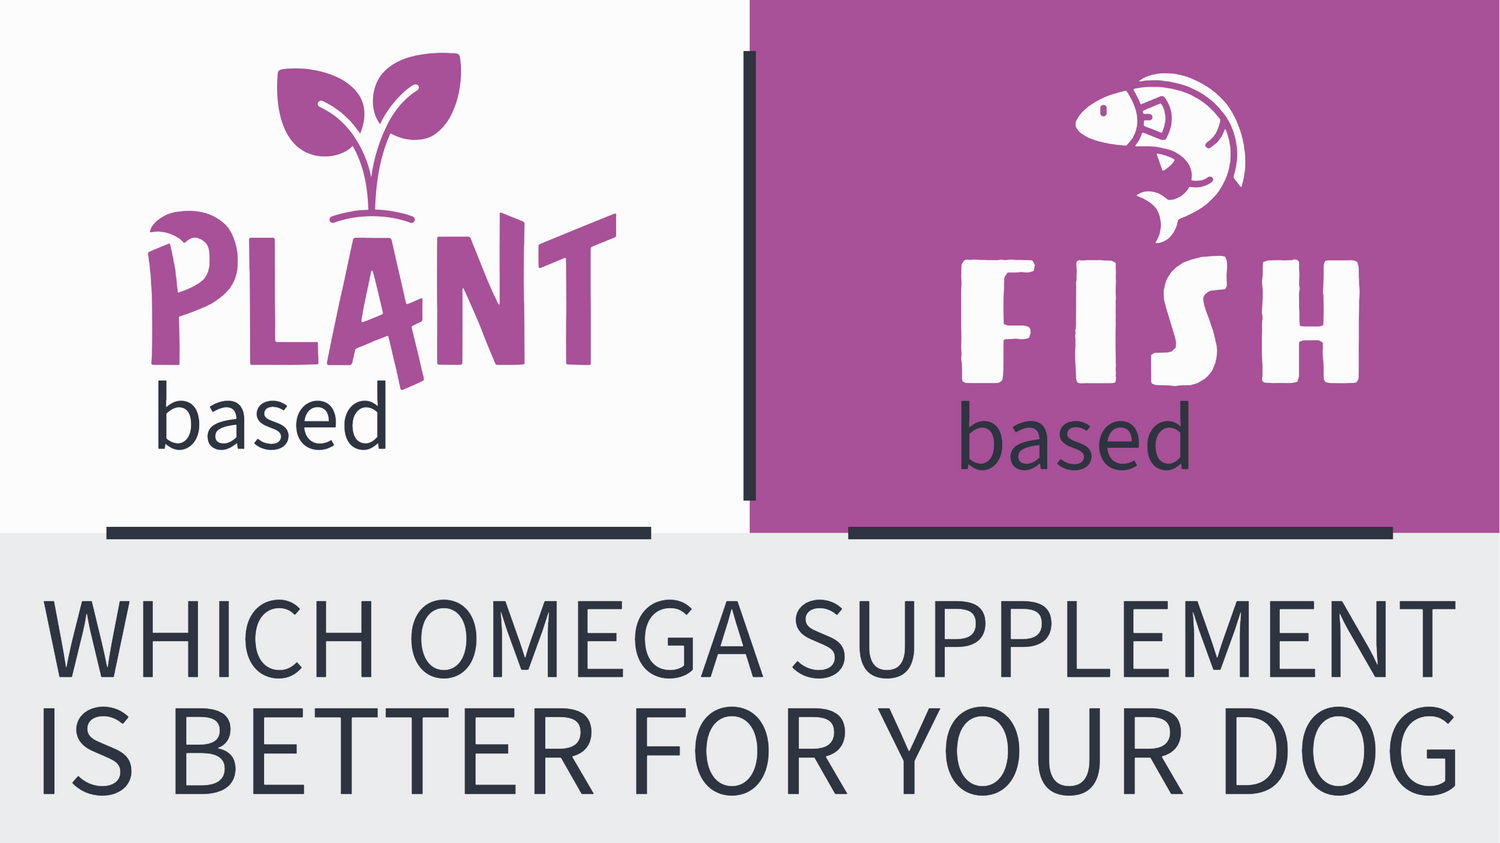 An icon for plant based and one for fish based  and the text “Fish Oil vs. Plant Oil: Which is Best for Your Dog's Health?”